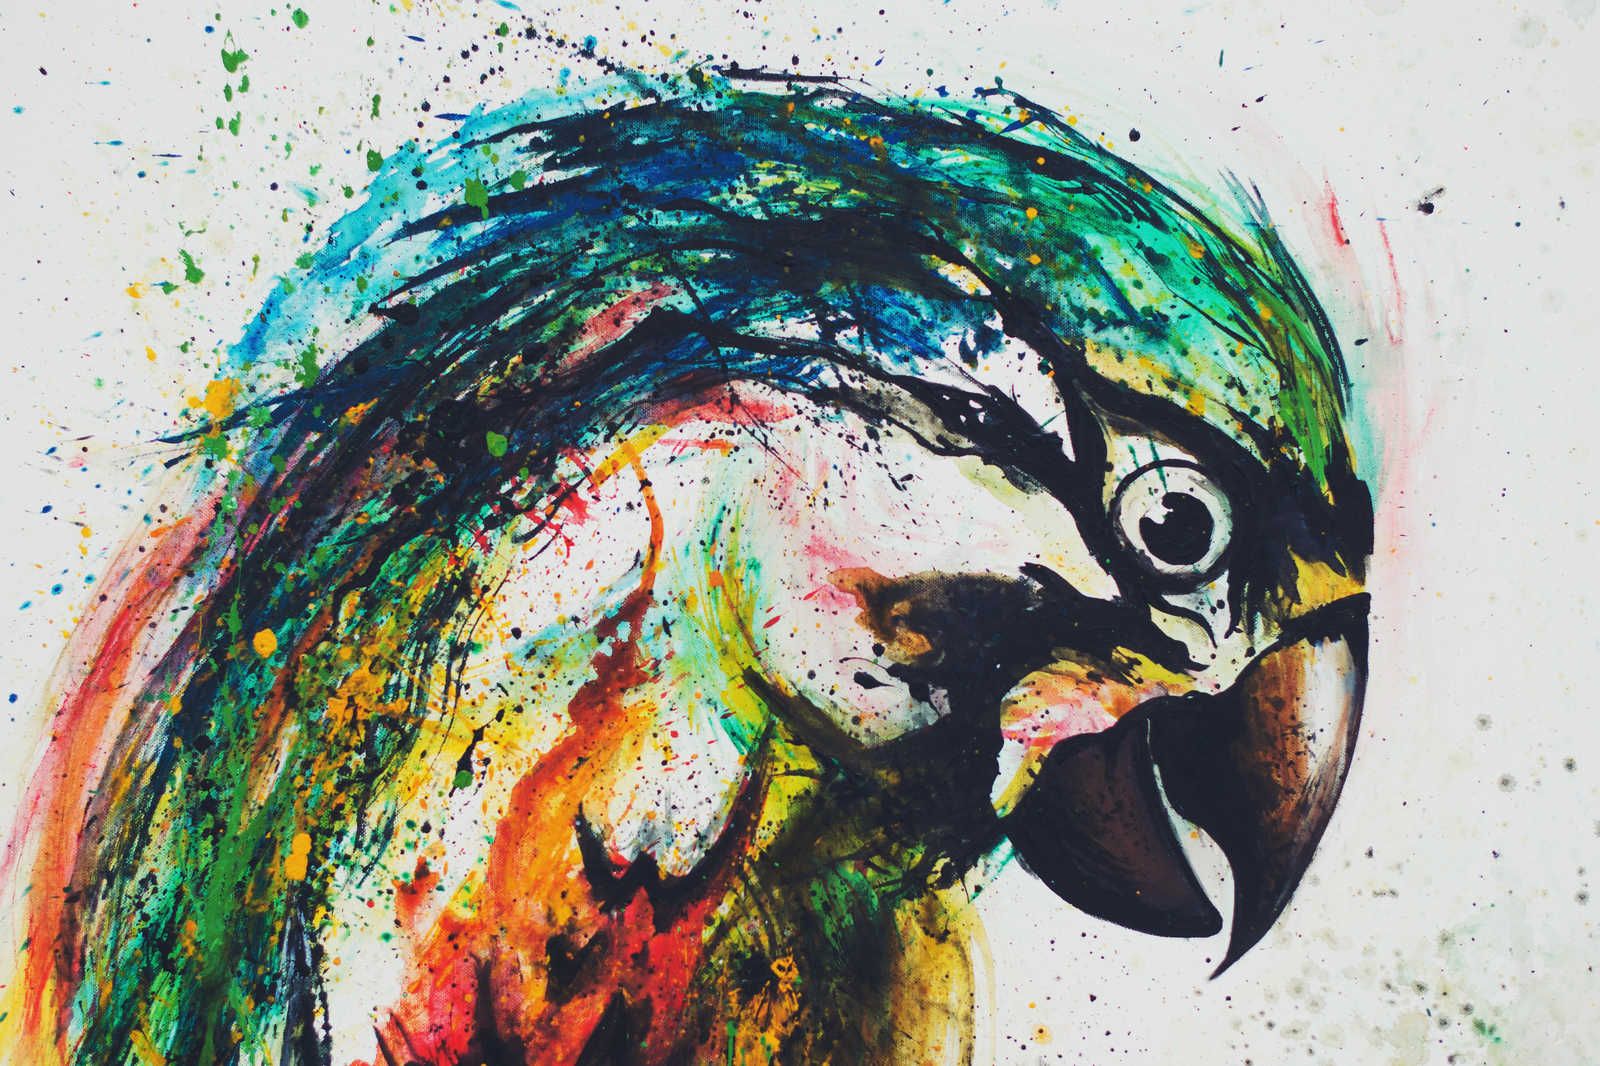             Canvas painting Parrot in colourful drawing style - 0,90 m x 0,60 m
        